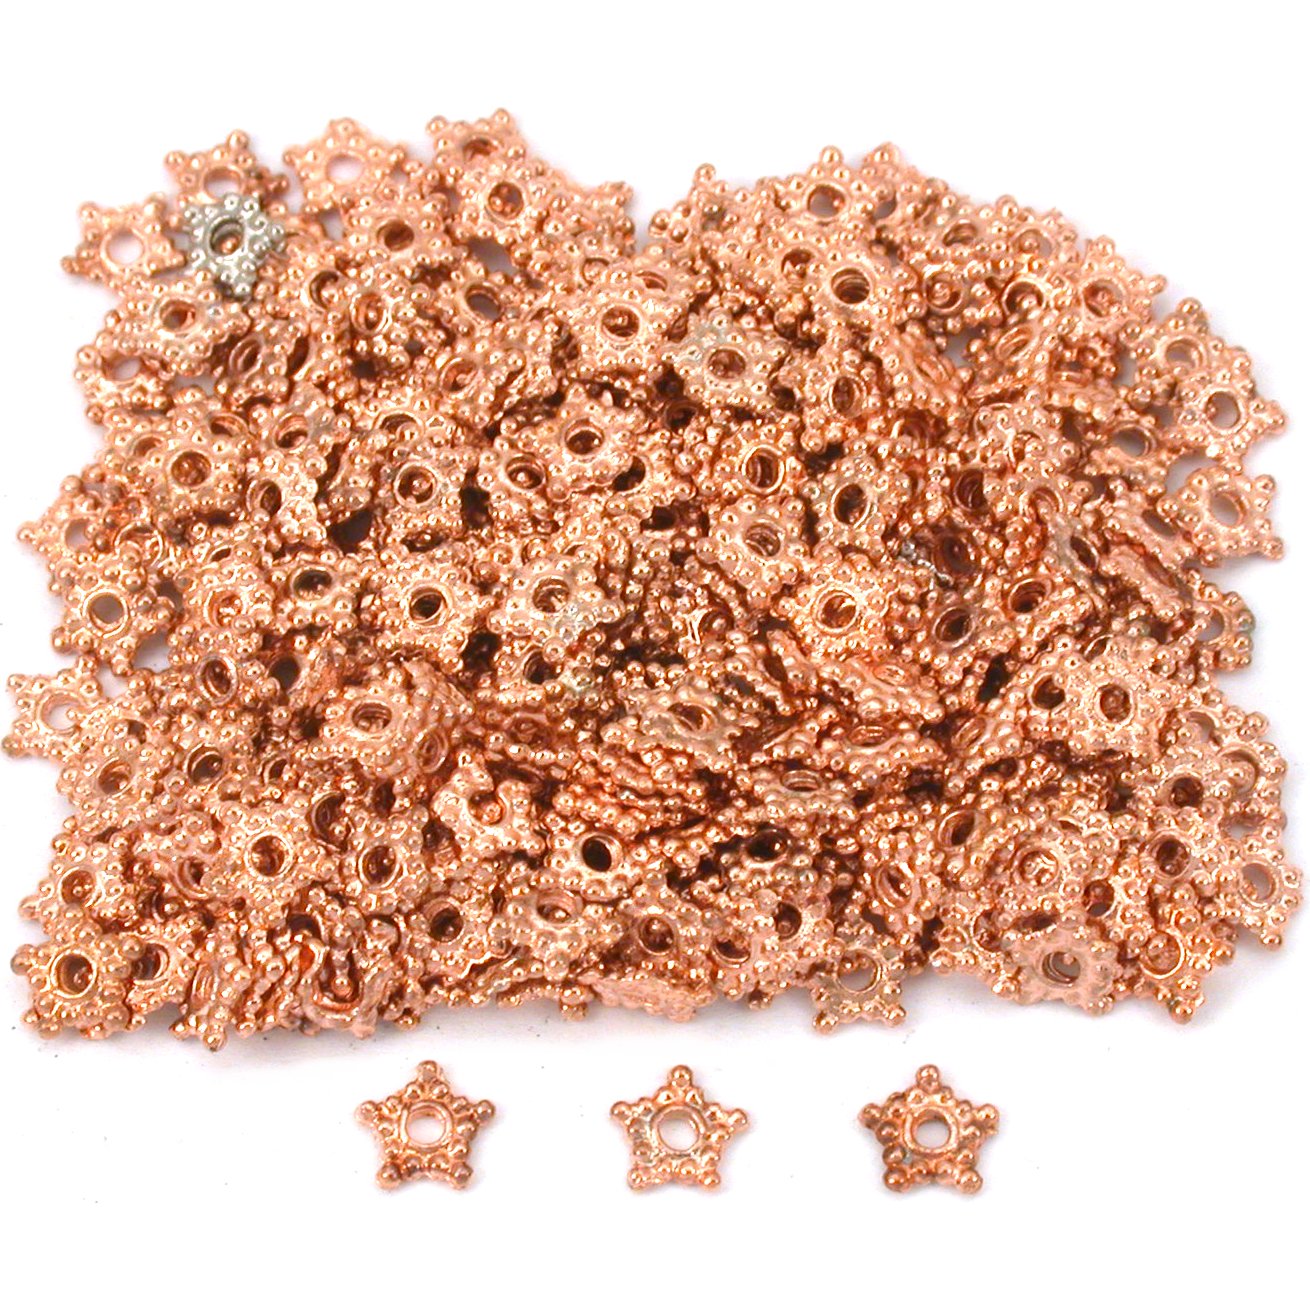 Bali Spacer Star Copper Plated Beads 5mm 290Pcs Approx.